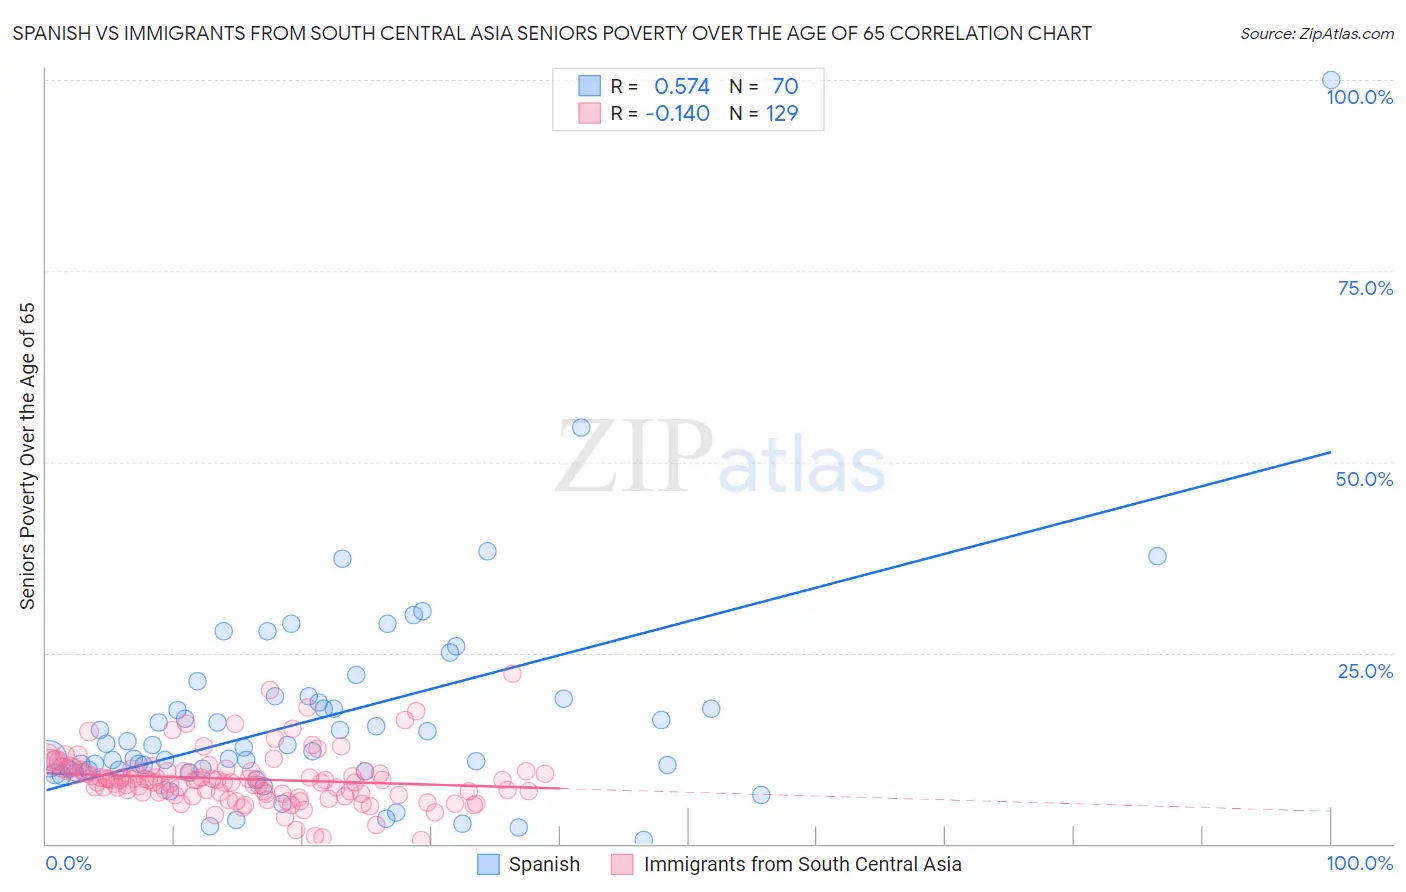 Spanish vs Immigrants from South Central Asia Seniors Poverty Over the Age of 65